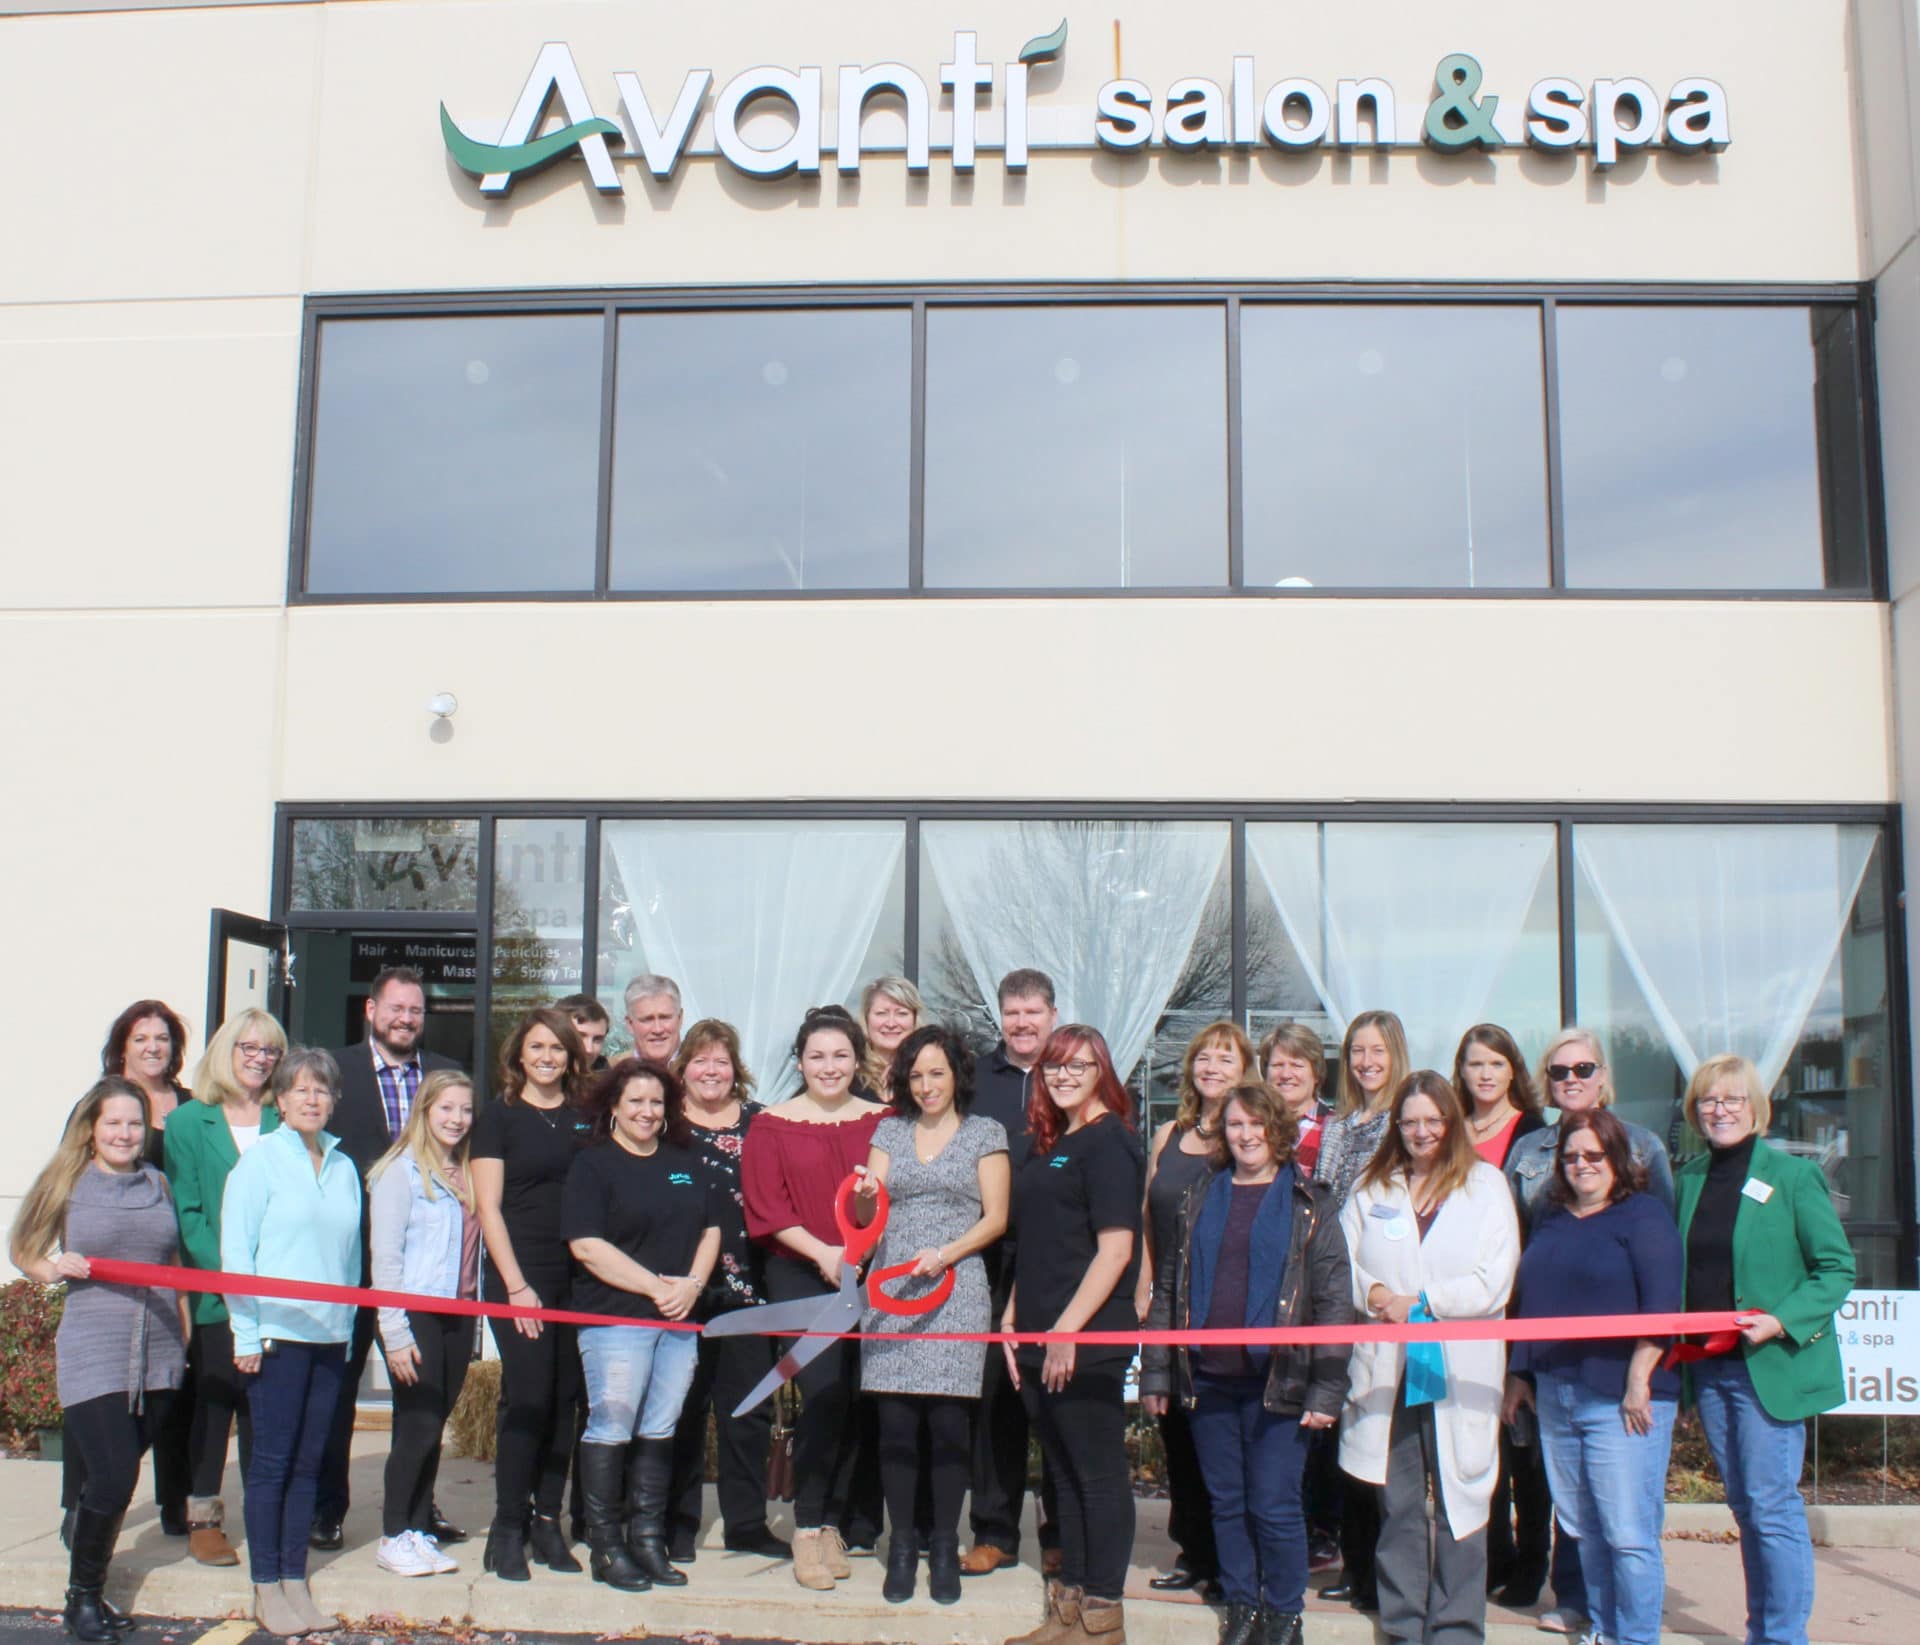 Avanti Salon team cutting red ribbon in front of building